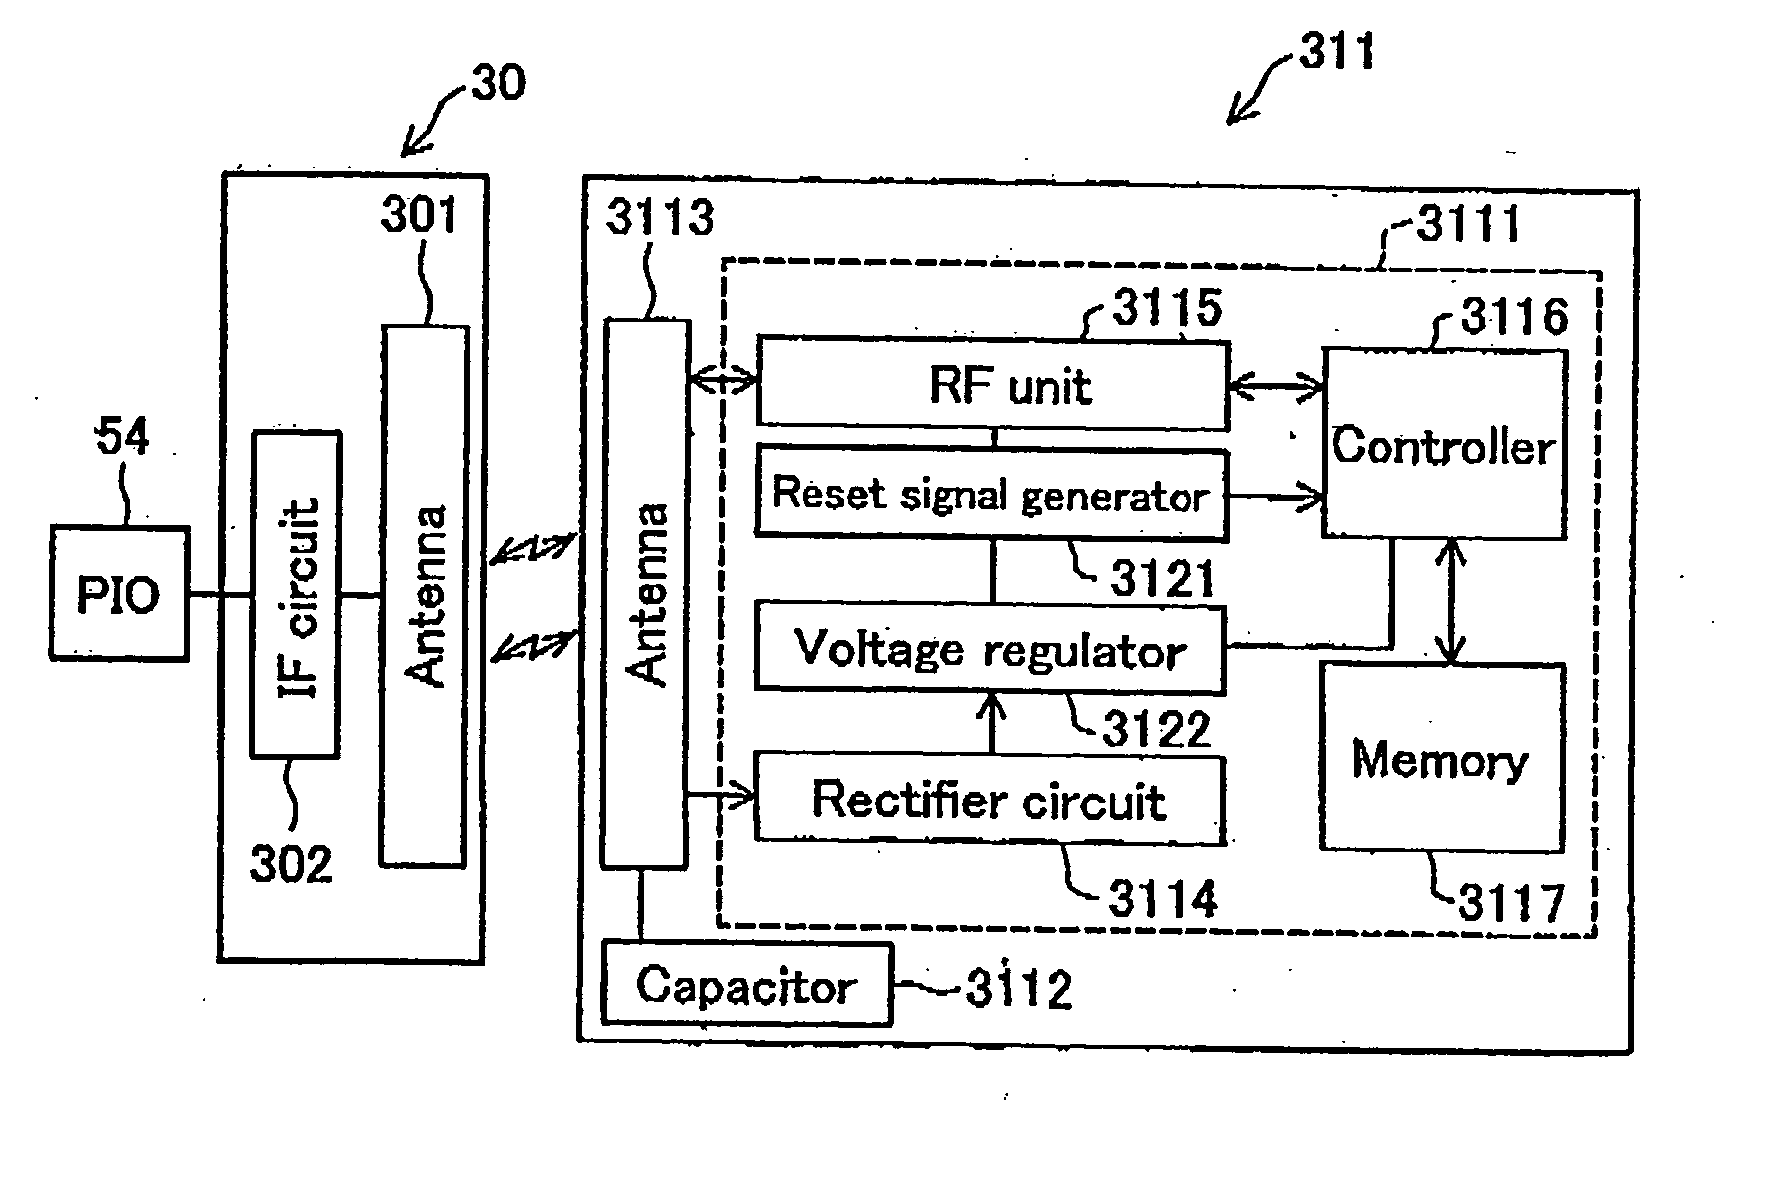 Non-contact communication between a device and its expendable container